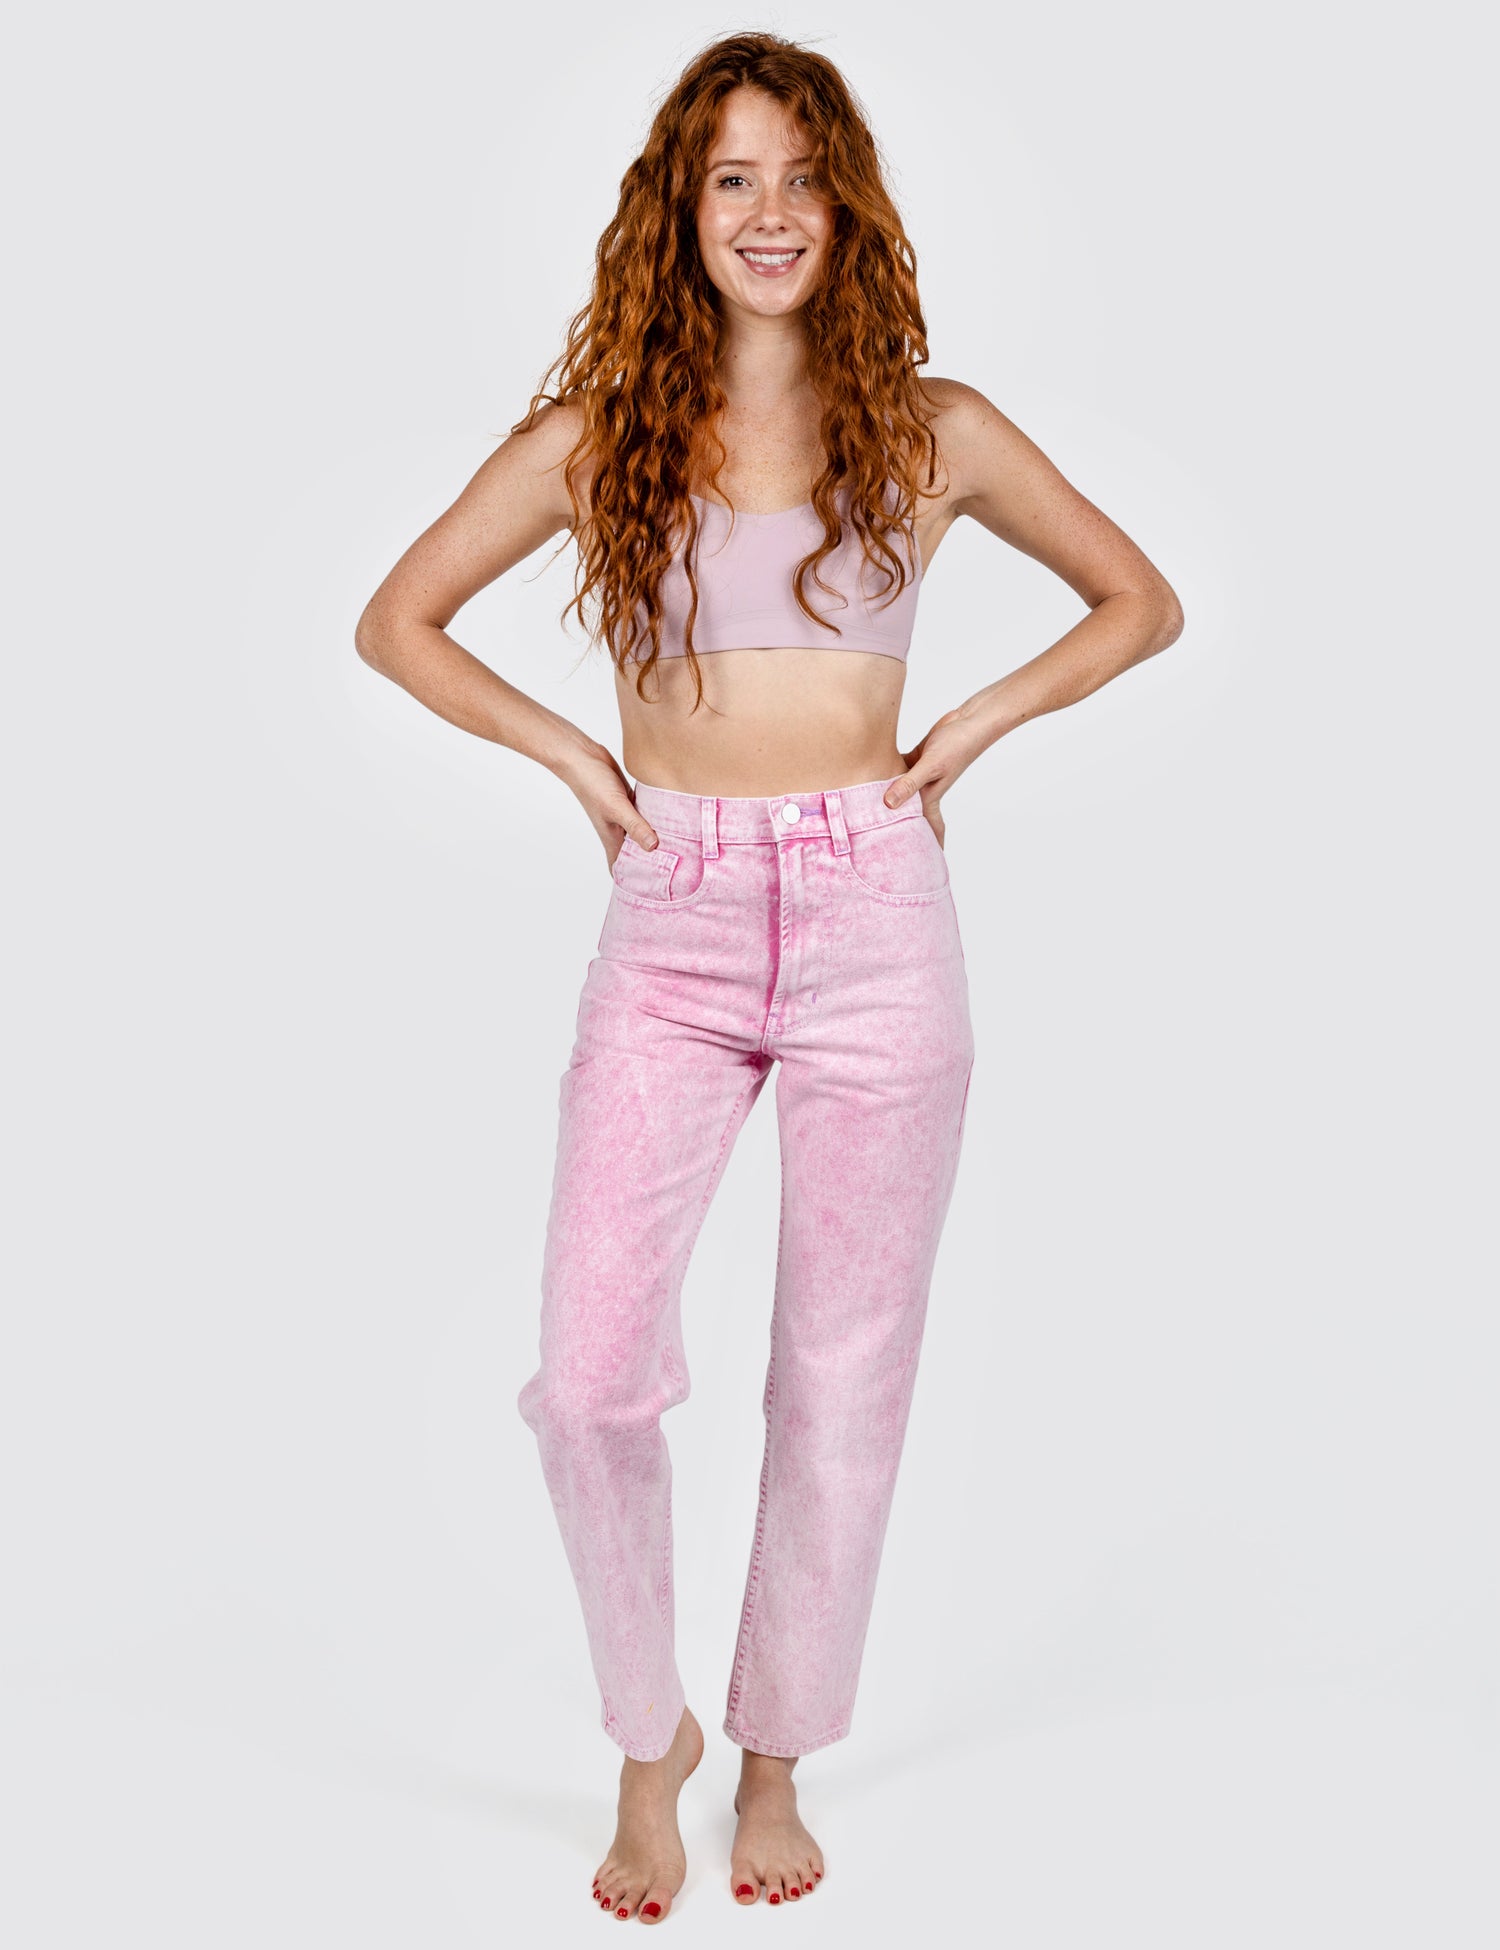 Woman wearing light pink washed out jeans